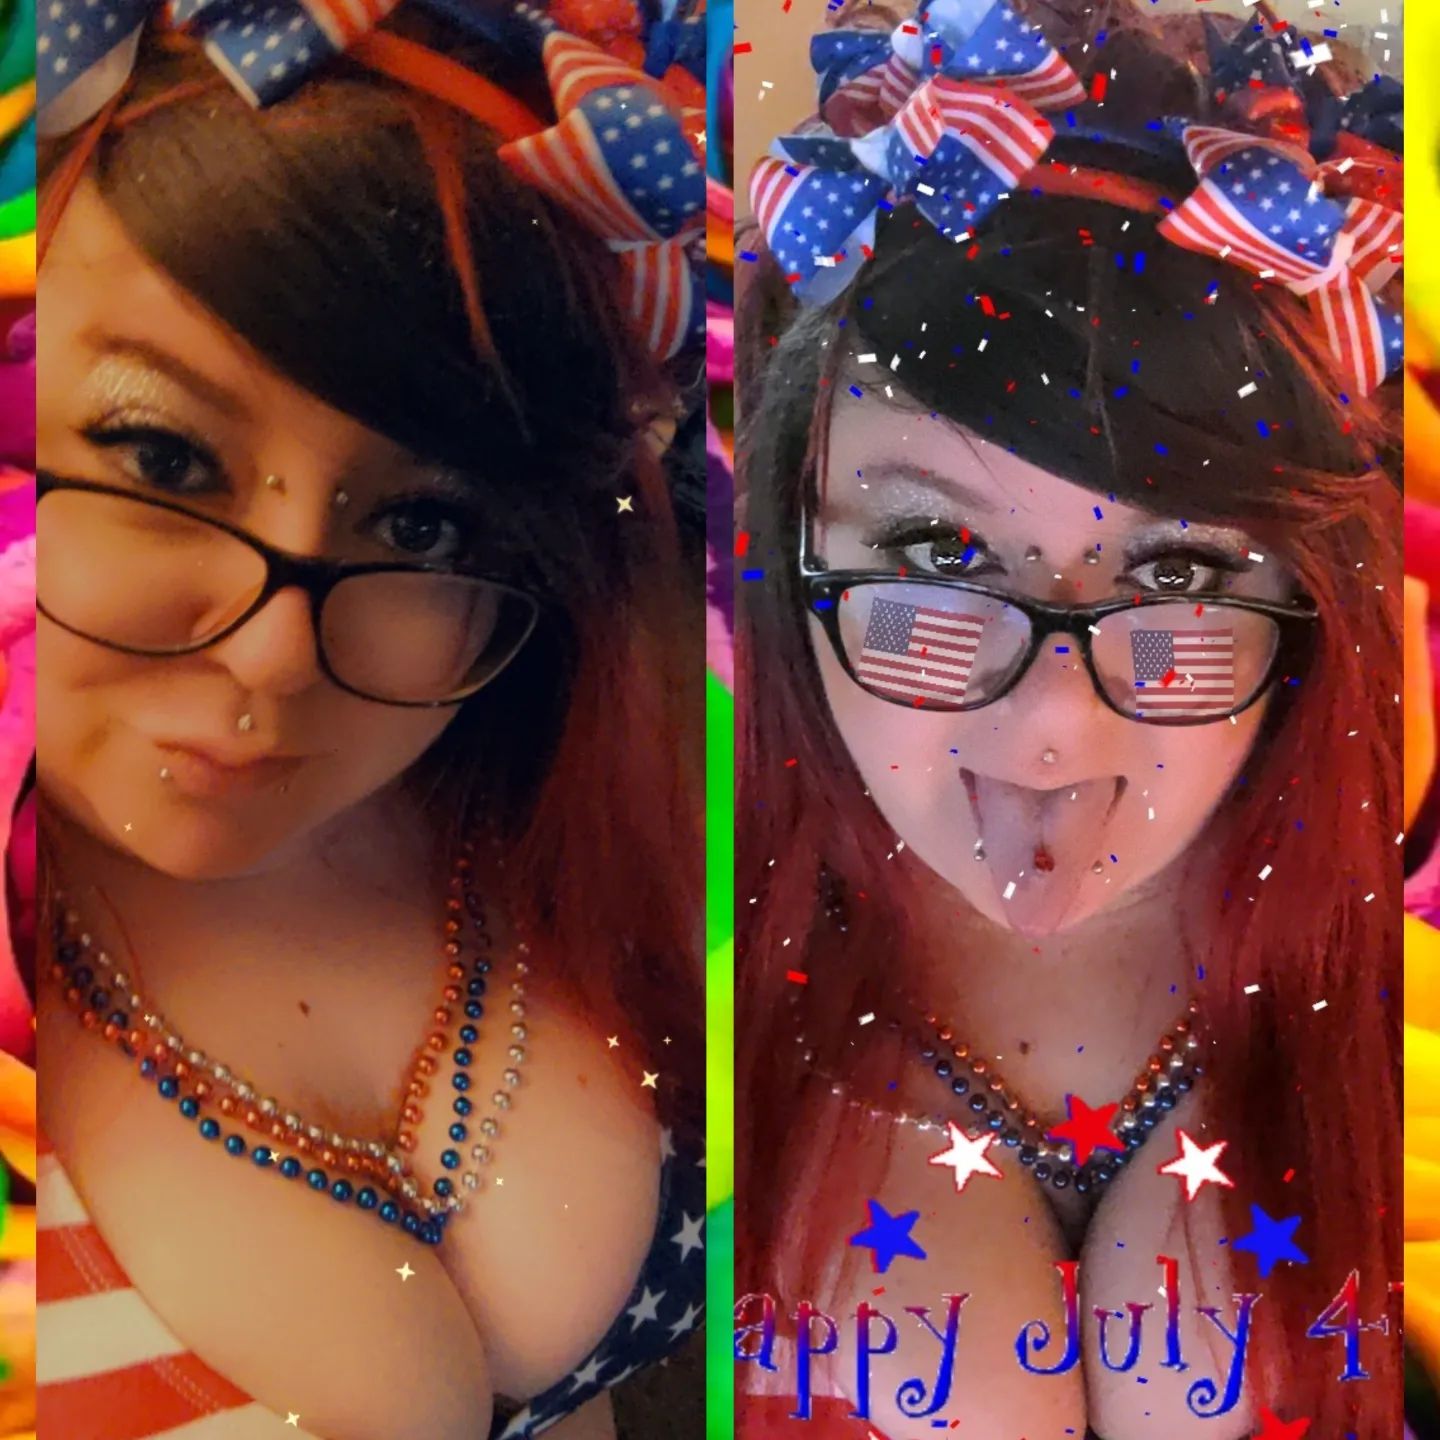 Happy Independence Day 🎇🎆🎉 #twitchaffiliate #twitchstreamer #egirl #ethot #camgirl #OF #0nlyfans #0nlyf4ns